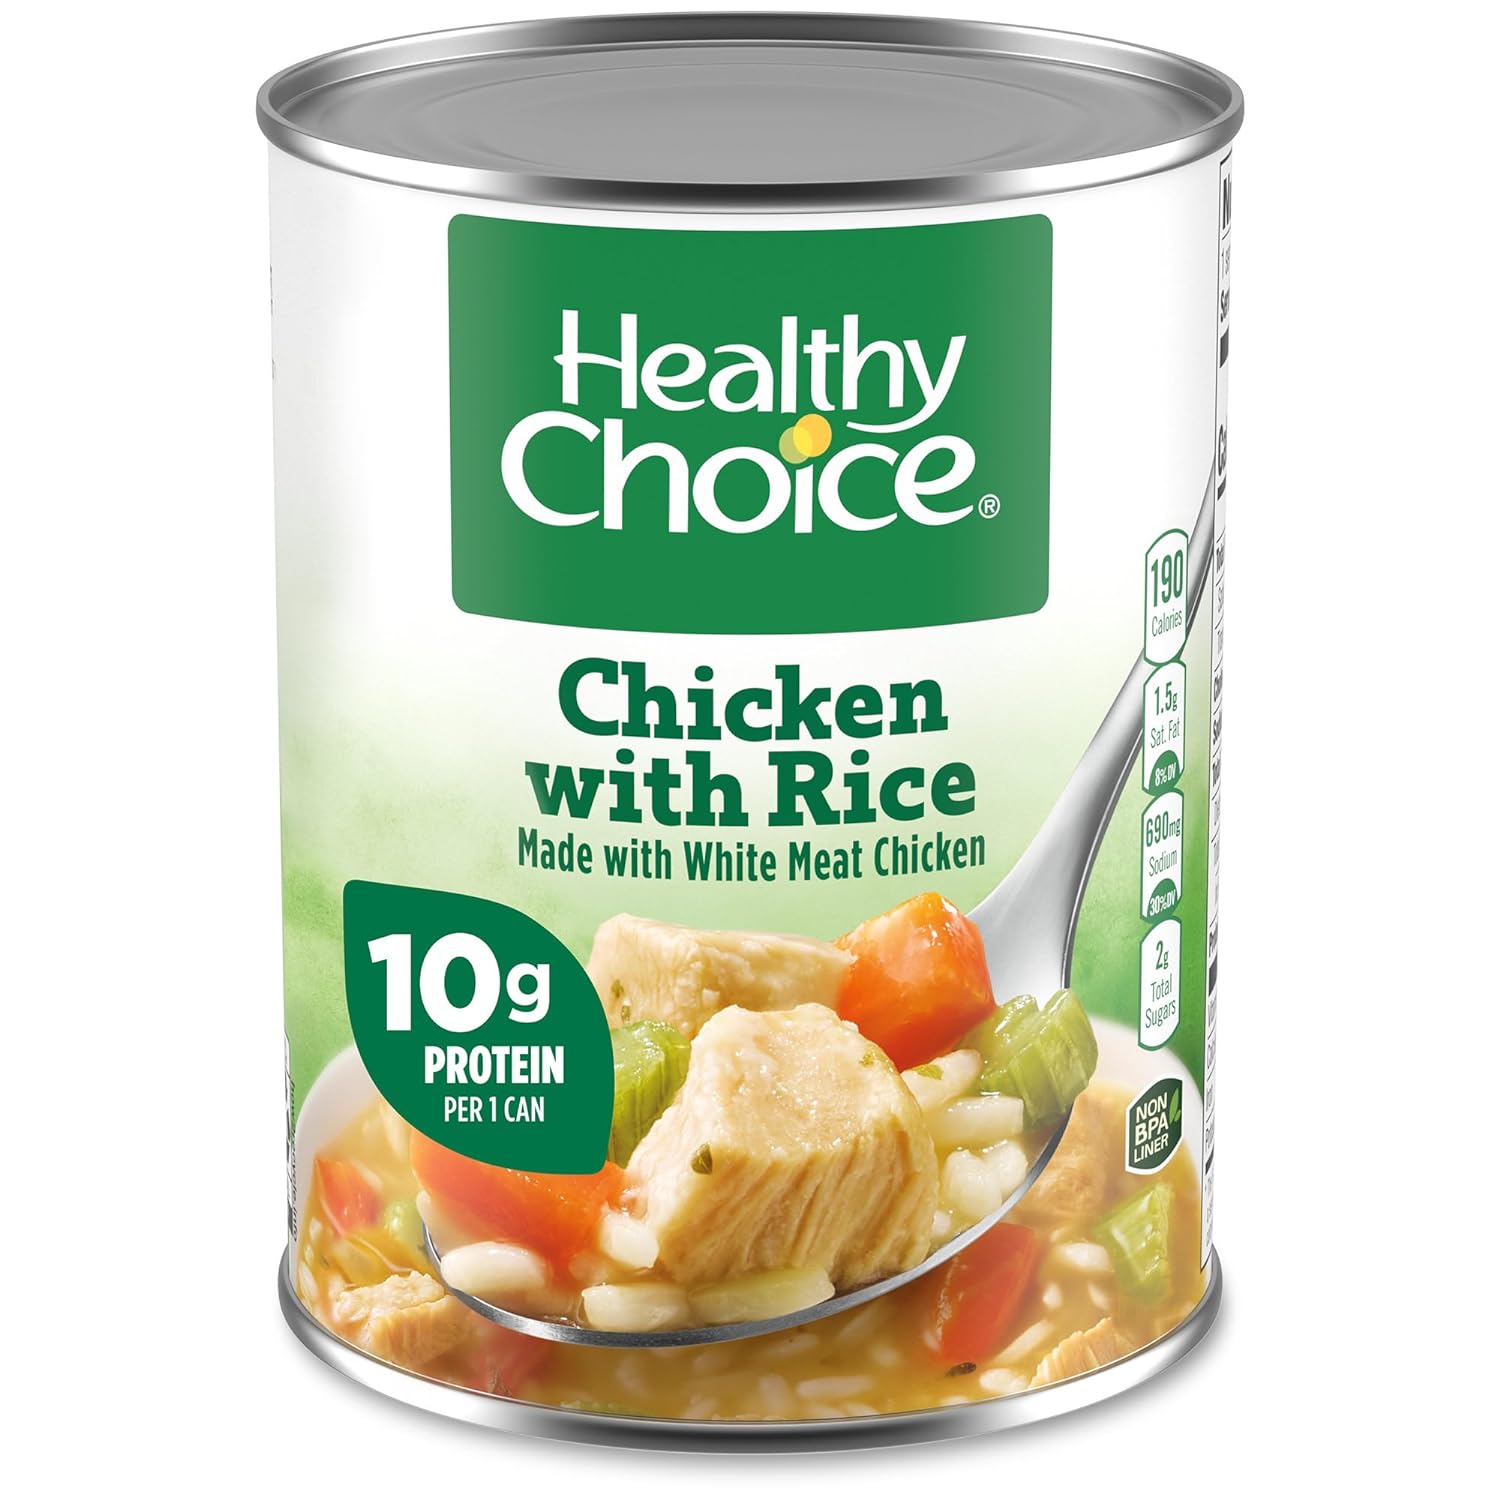 Healthy Choice Chicken With Rice Soup, 15 Oz Cans